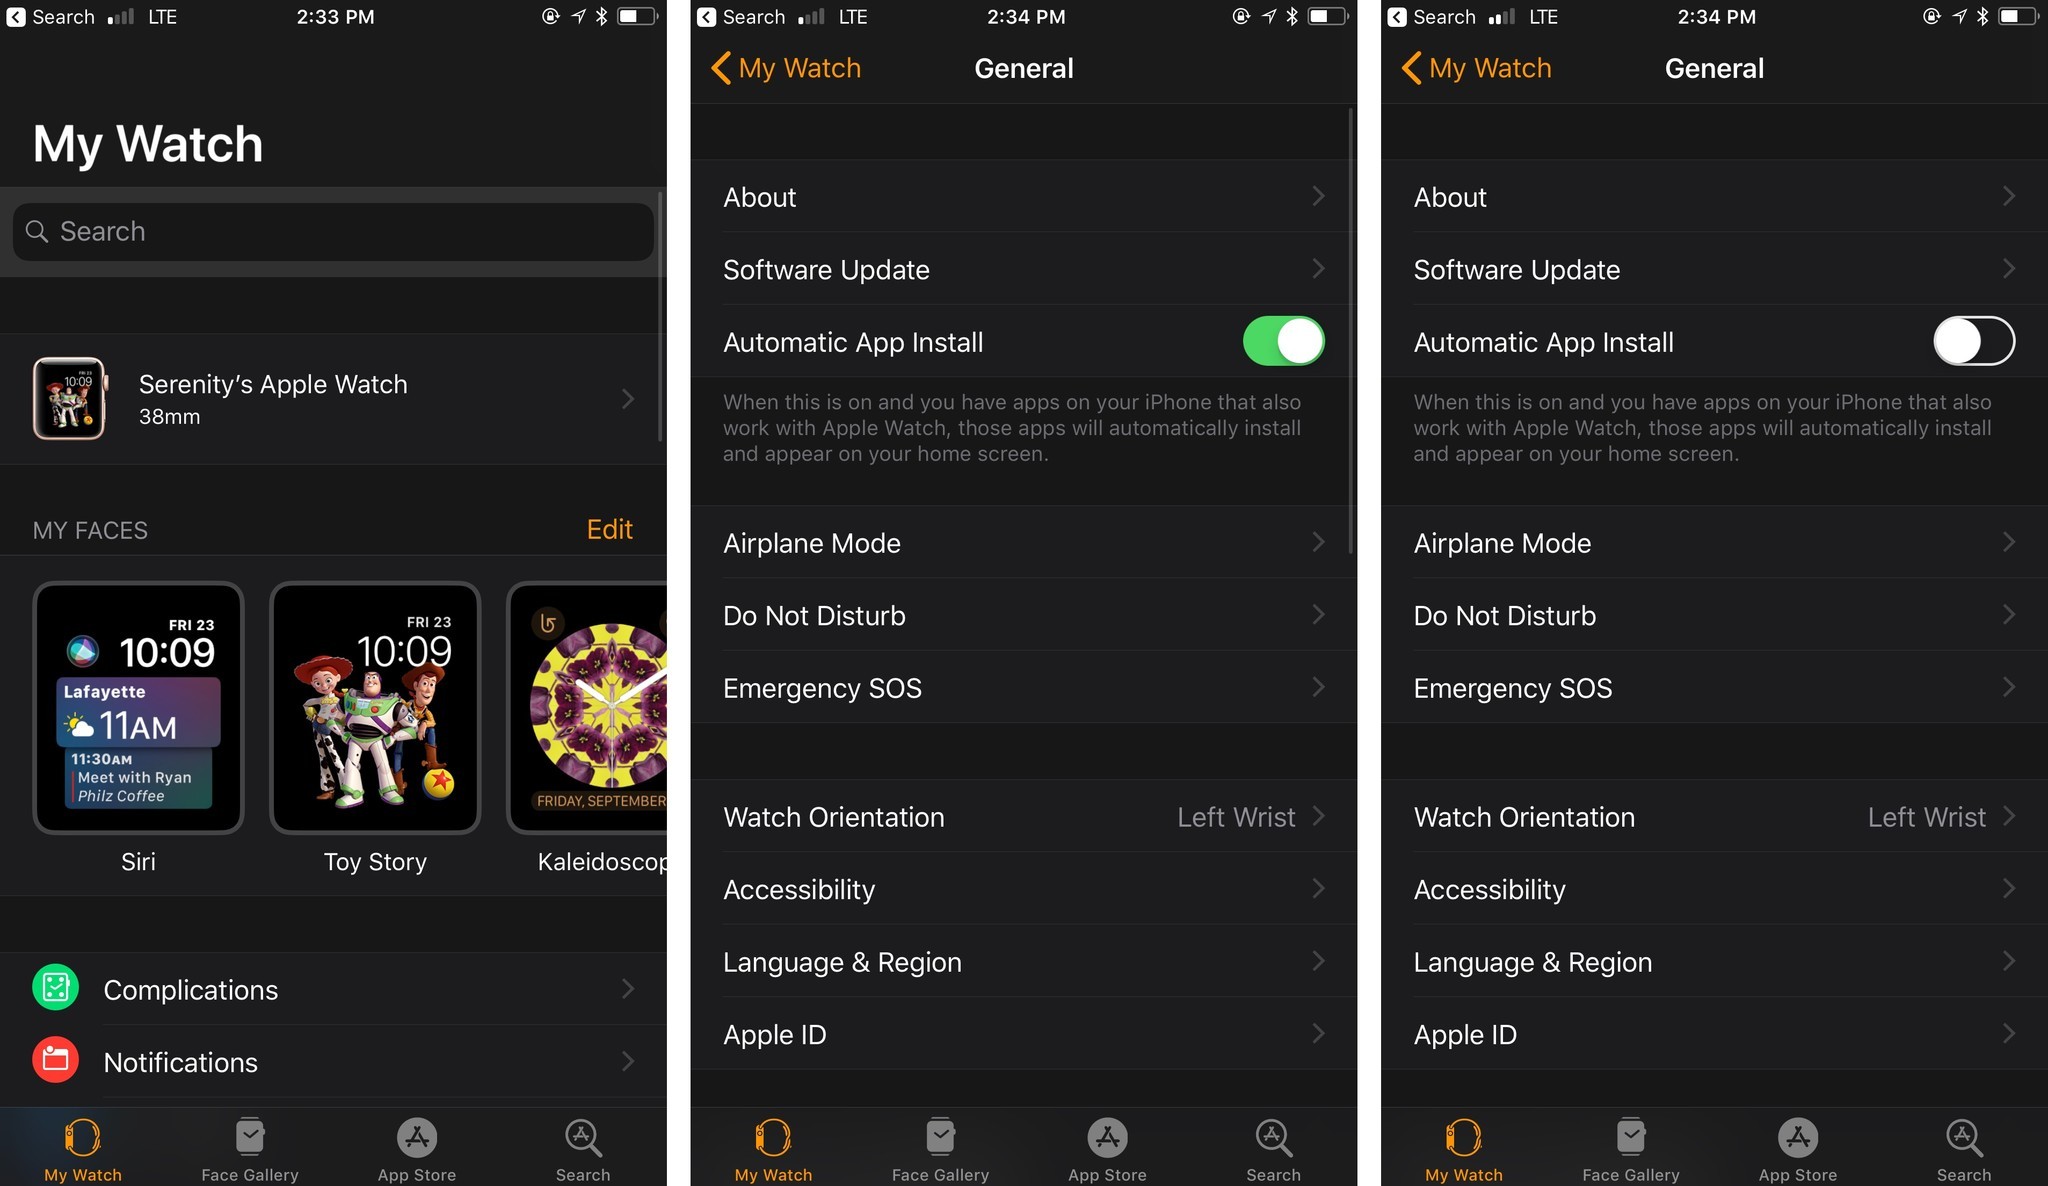 How to Enable and Disable Automatic App Install for Apple Watch in the Watch app on iPhone